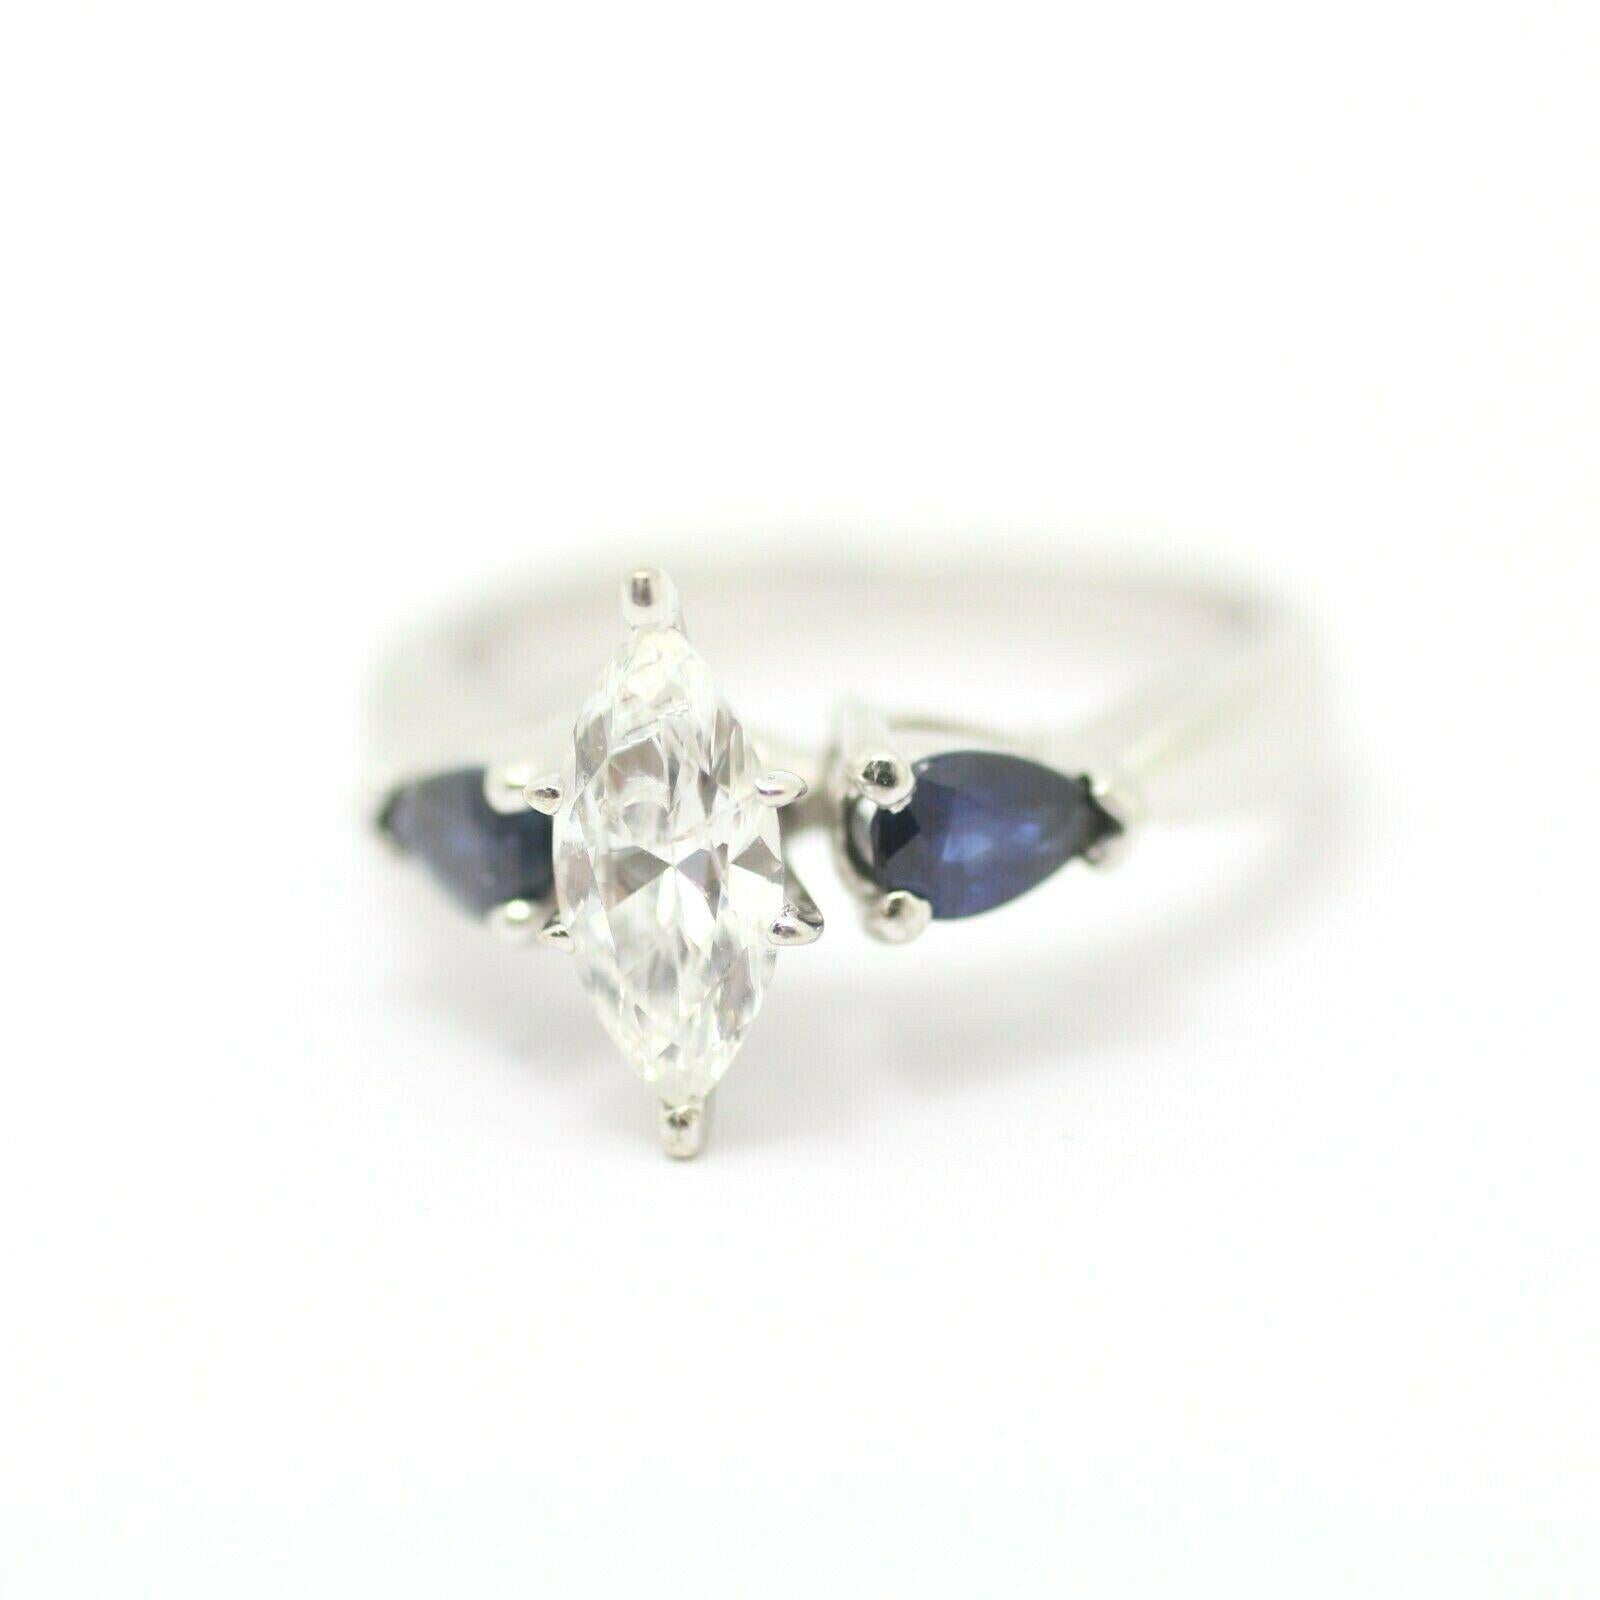 MARQUISE DIAMOND AND PEAR-SHAPED BLUE SAPPHIRE SOLITAIRE RING IN 14K WHITE GOLD
Specifications:
    main stone: MARQUISE DIAM 0.64 CARAT
    SIDE STONE: 2 PCS. PS BLUE SAPPHIRE 4.87-3.03MM
    carat total weight: APPROXIMATELY 0.64 CTW
    color: H
